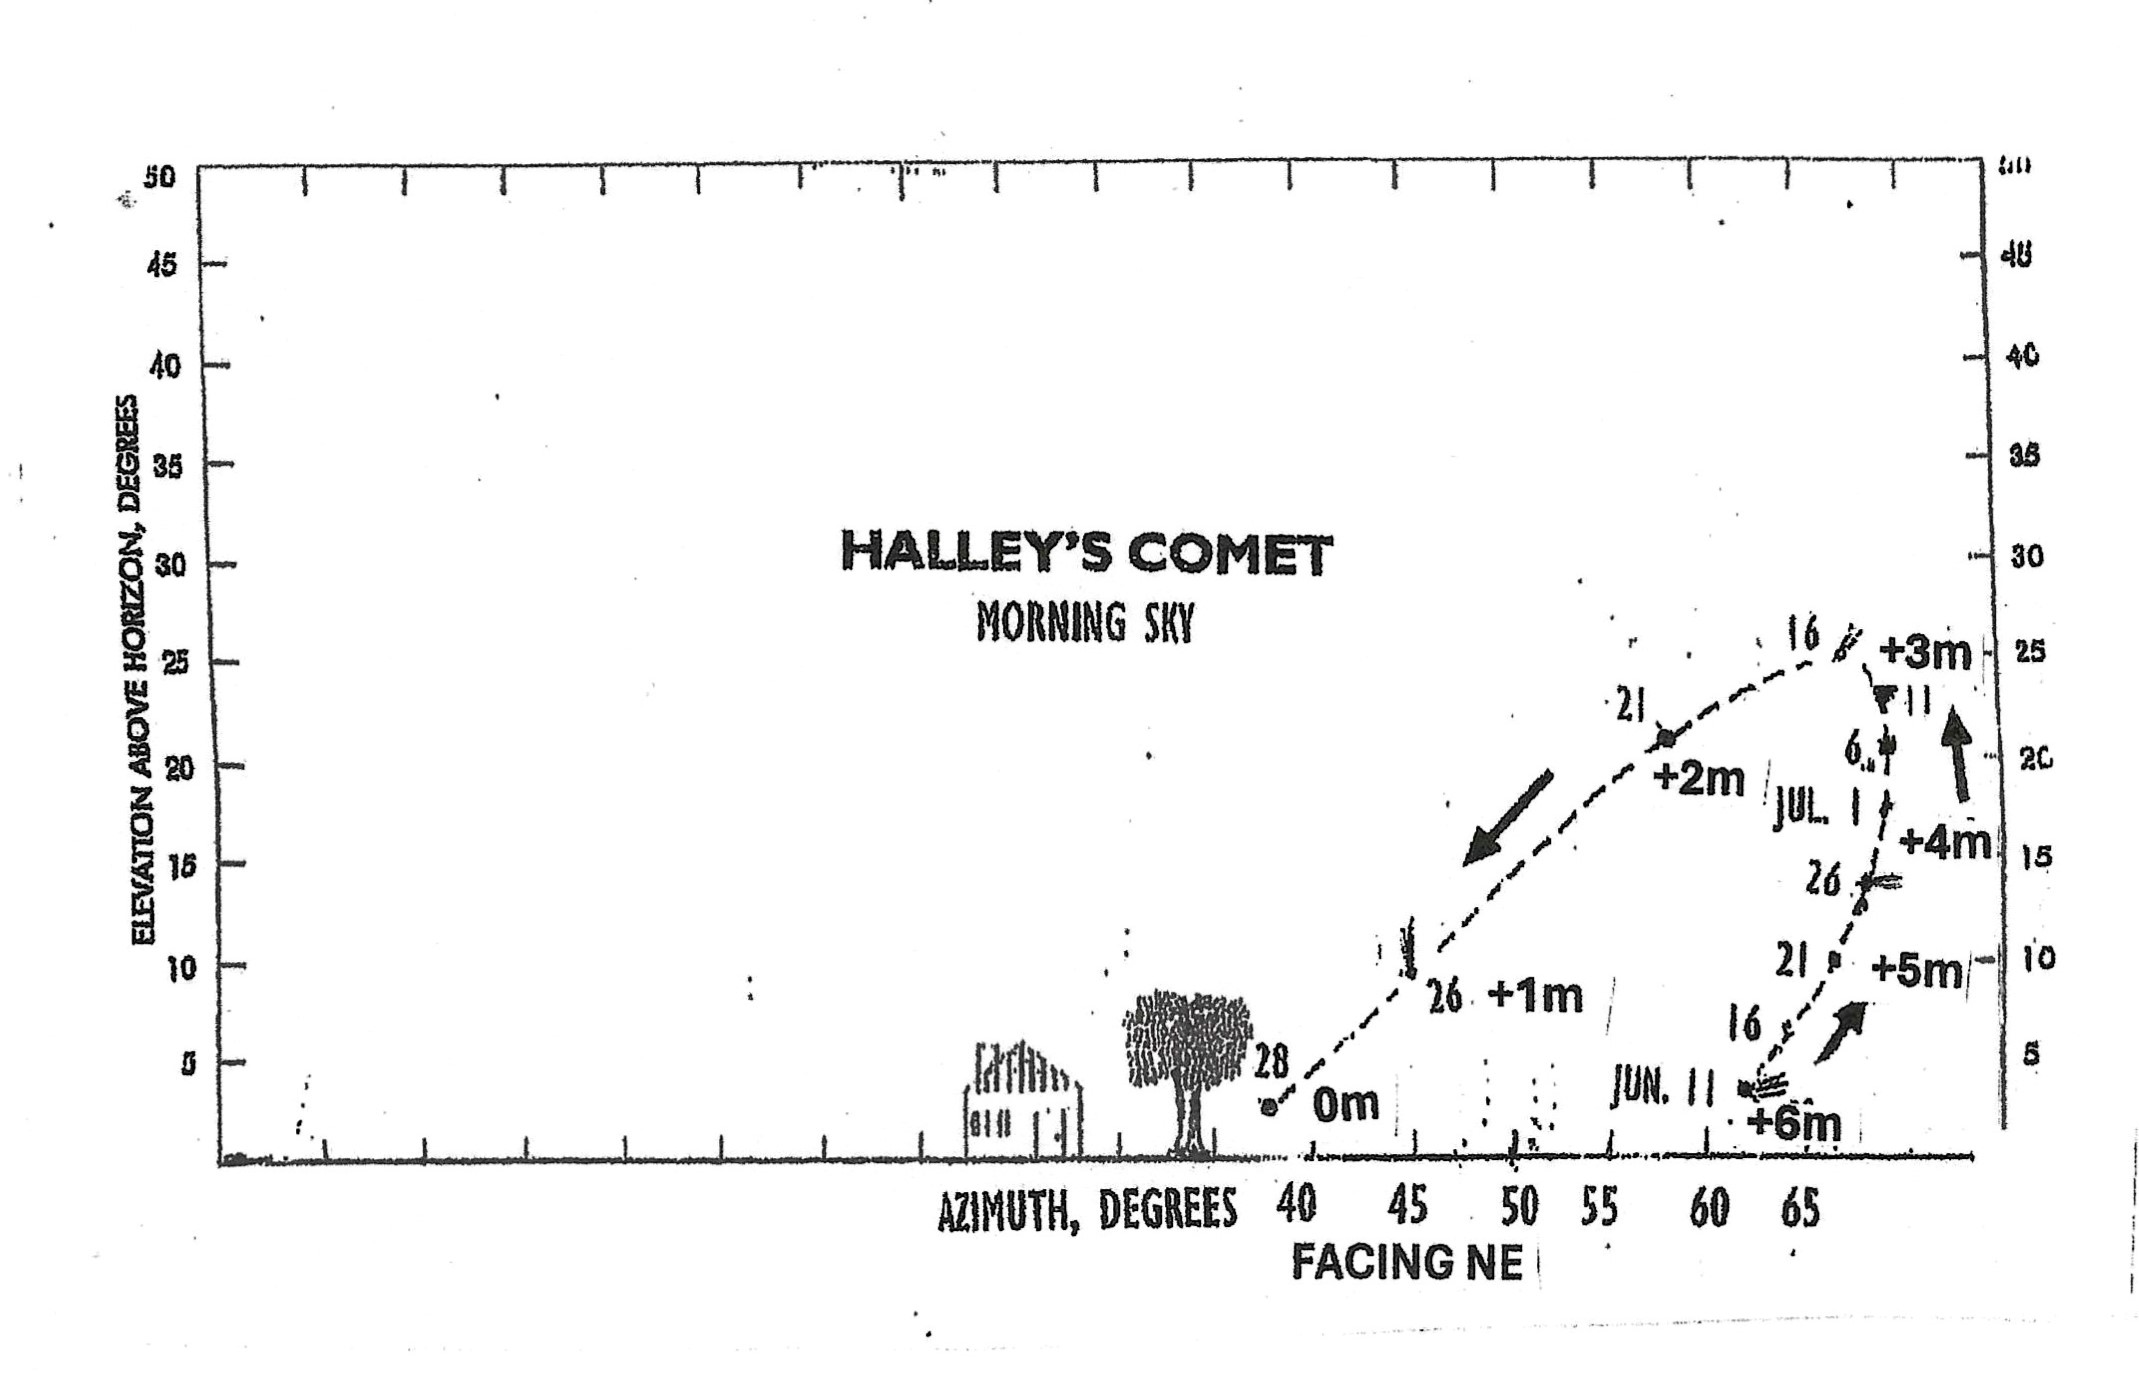 a graph showing when halley's comet will be visible in the spring and summer of 2061